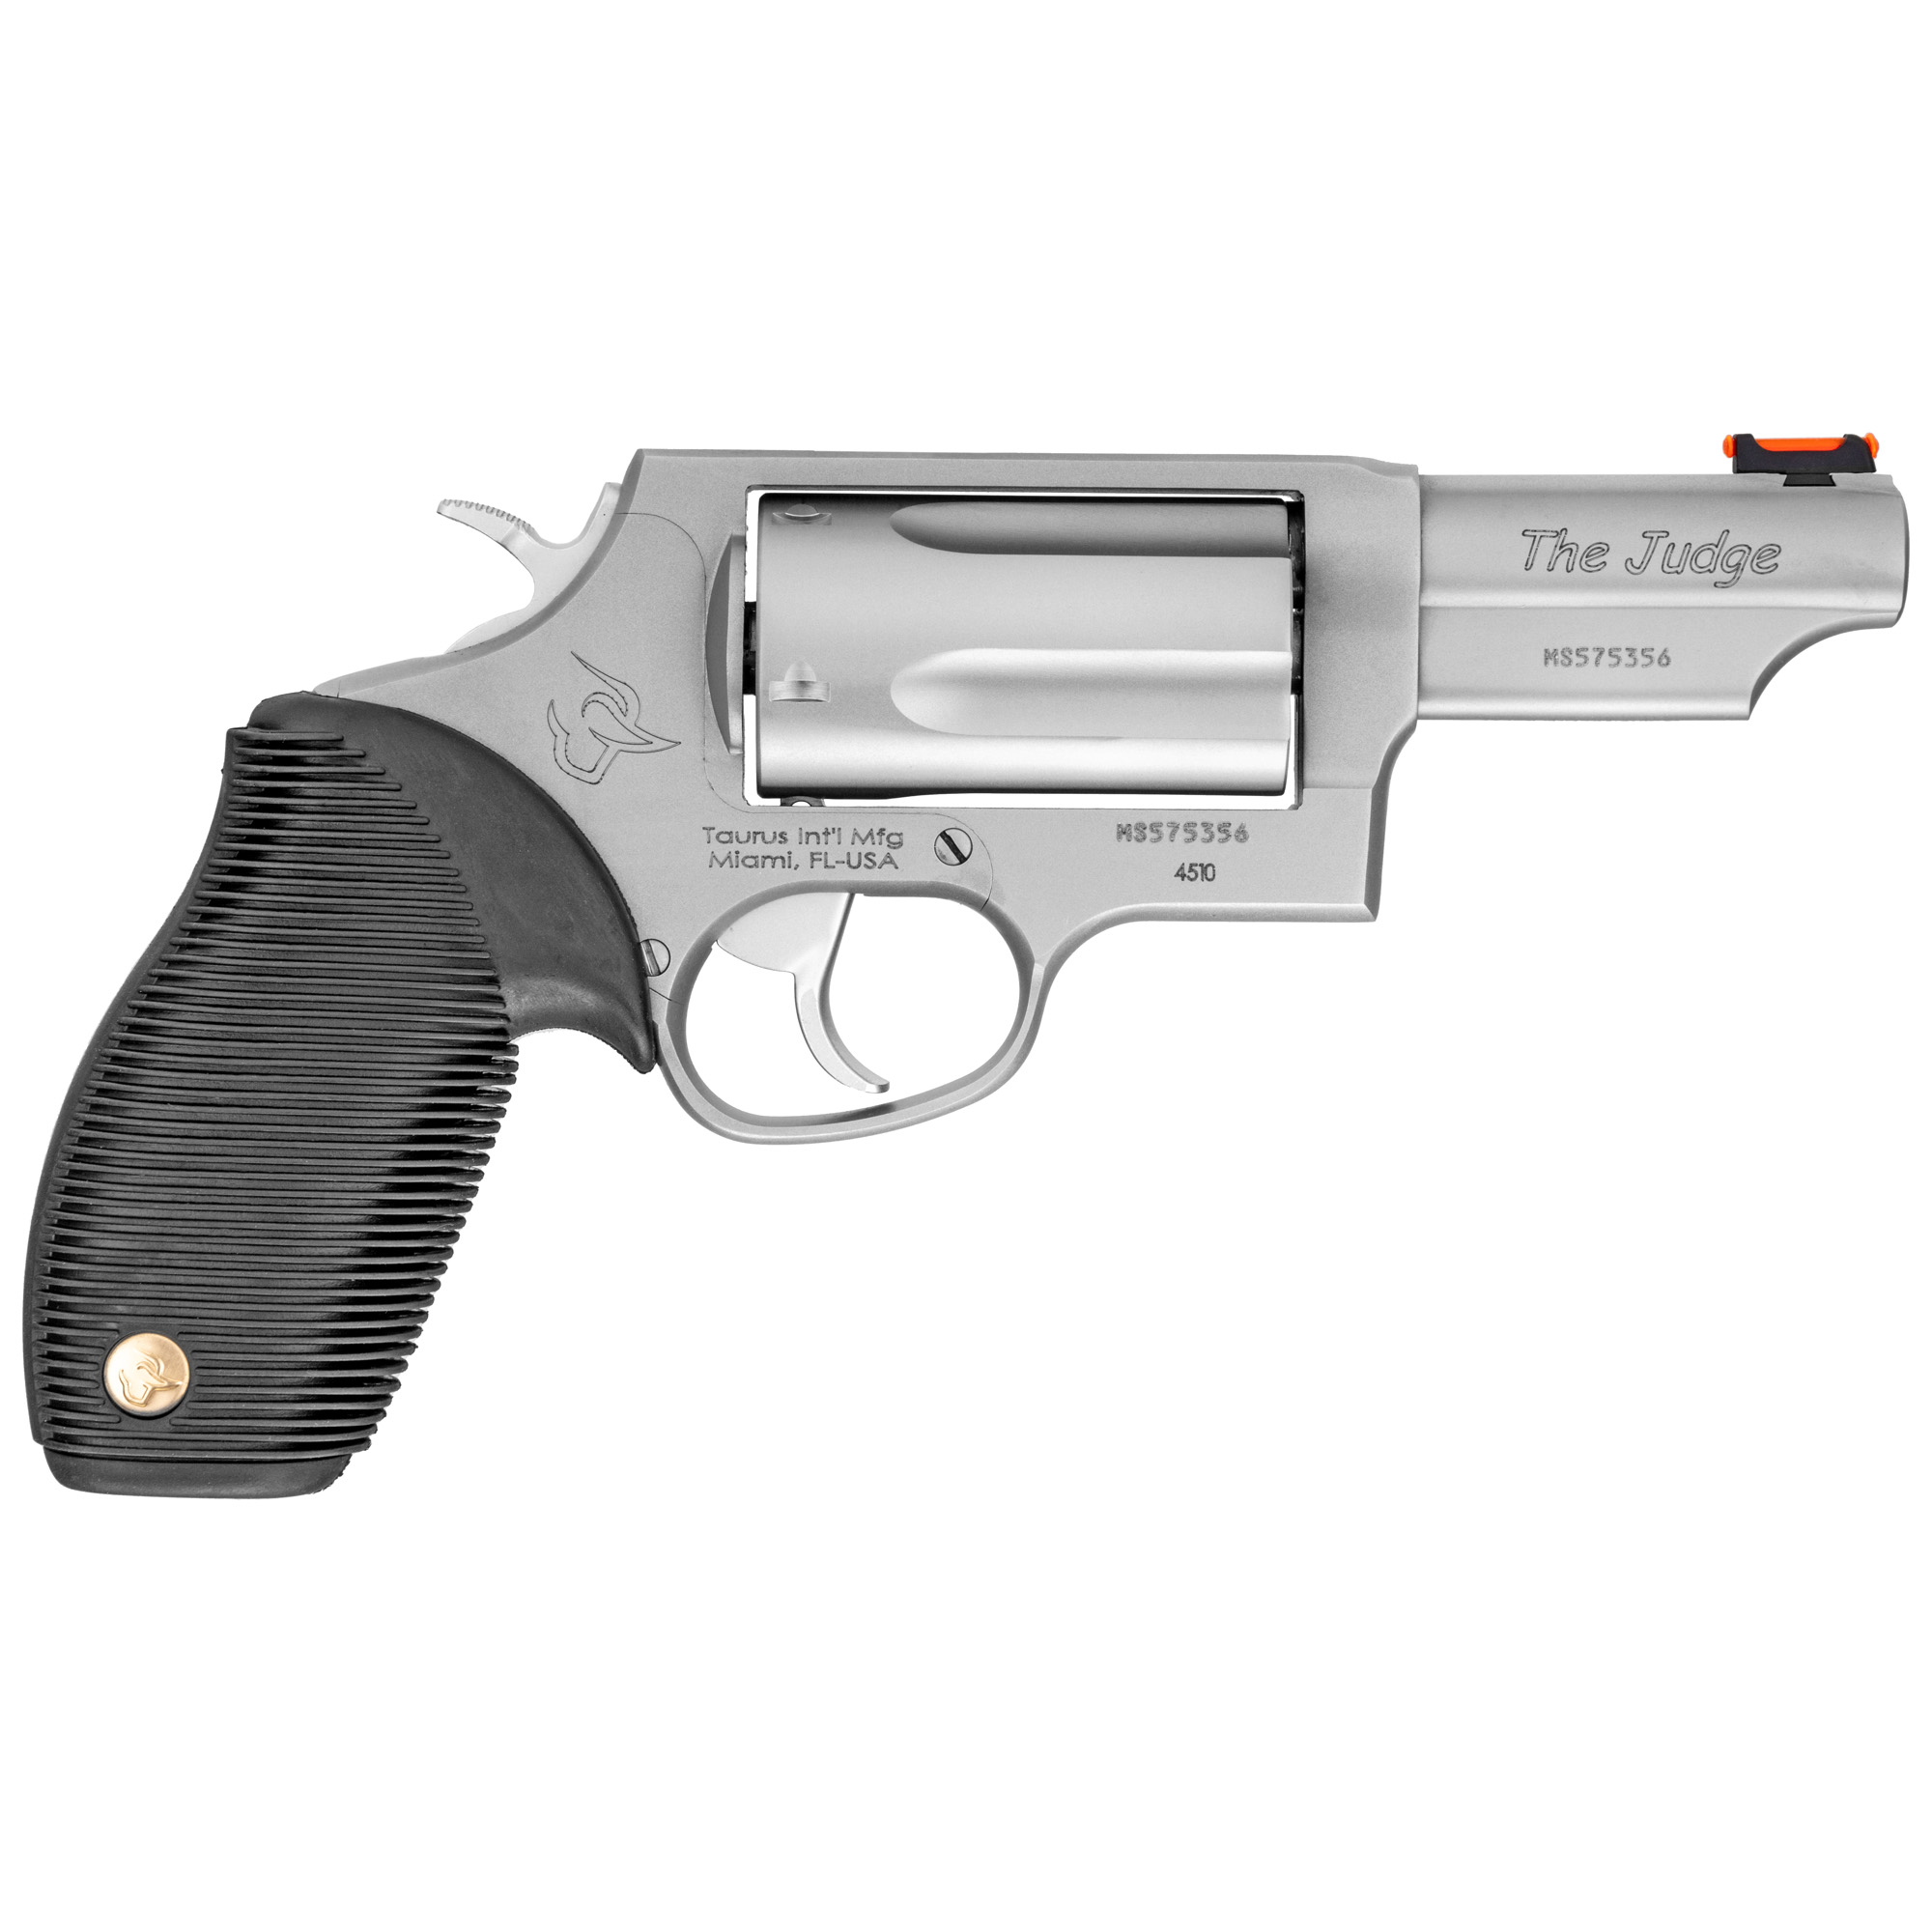 Taurus, Judge, Double Action, Metal Frame Revolver, Large Frame, 410 Gauge/45LC, 3" Barrel, 2.5" Chamber, Stainless Steel, Matte Finish, Silver, Rubber Grips, Fiber Optic Front Sight, 5 Rounds